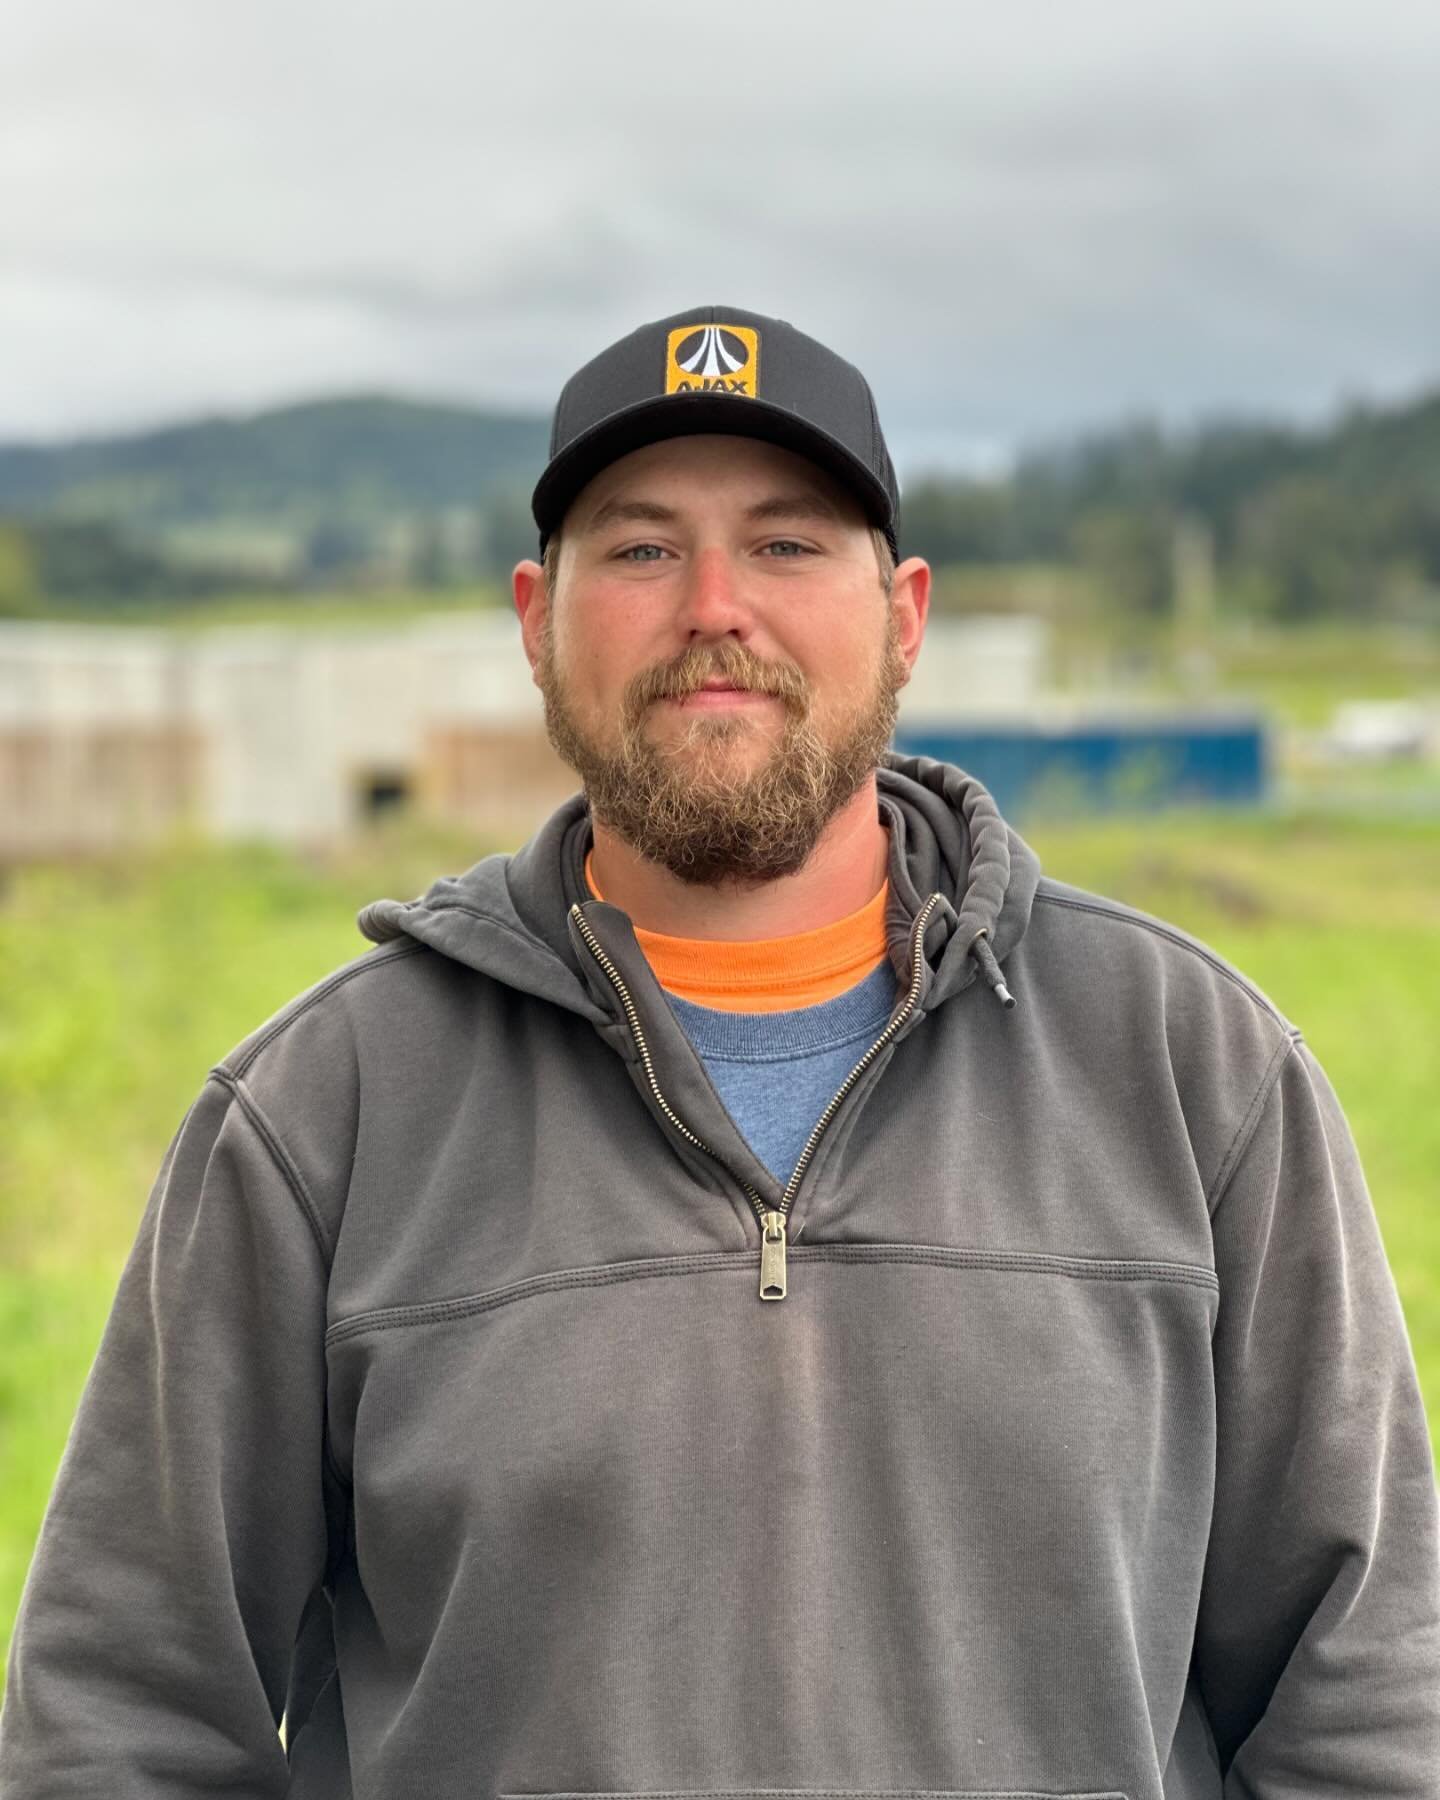 It&rsquo;s Meet the Team Monday! Andrew Dechand joins Team Ajax NW with 7+ years of experience. He can do a little bit of everything, but his favorite part of the job is moving dirt. If he could choose a superpower, Andrew would fly so he wouldn&rsqu